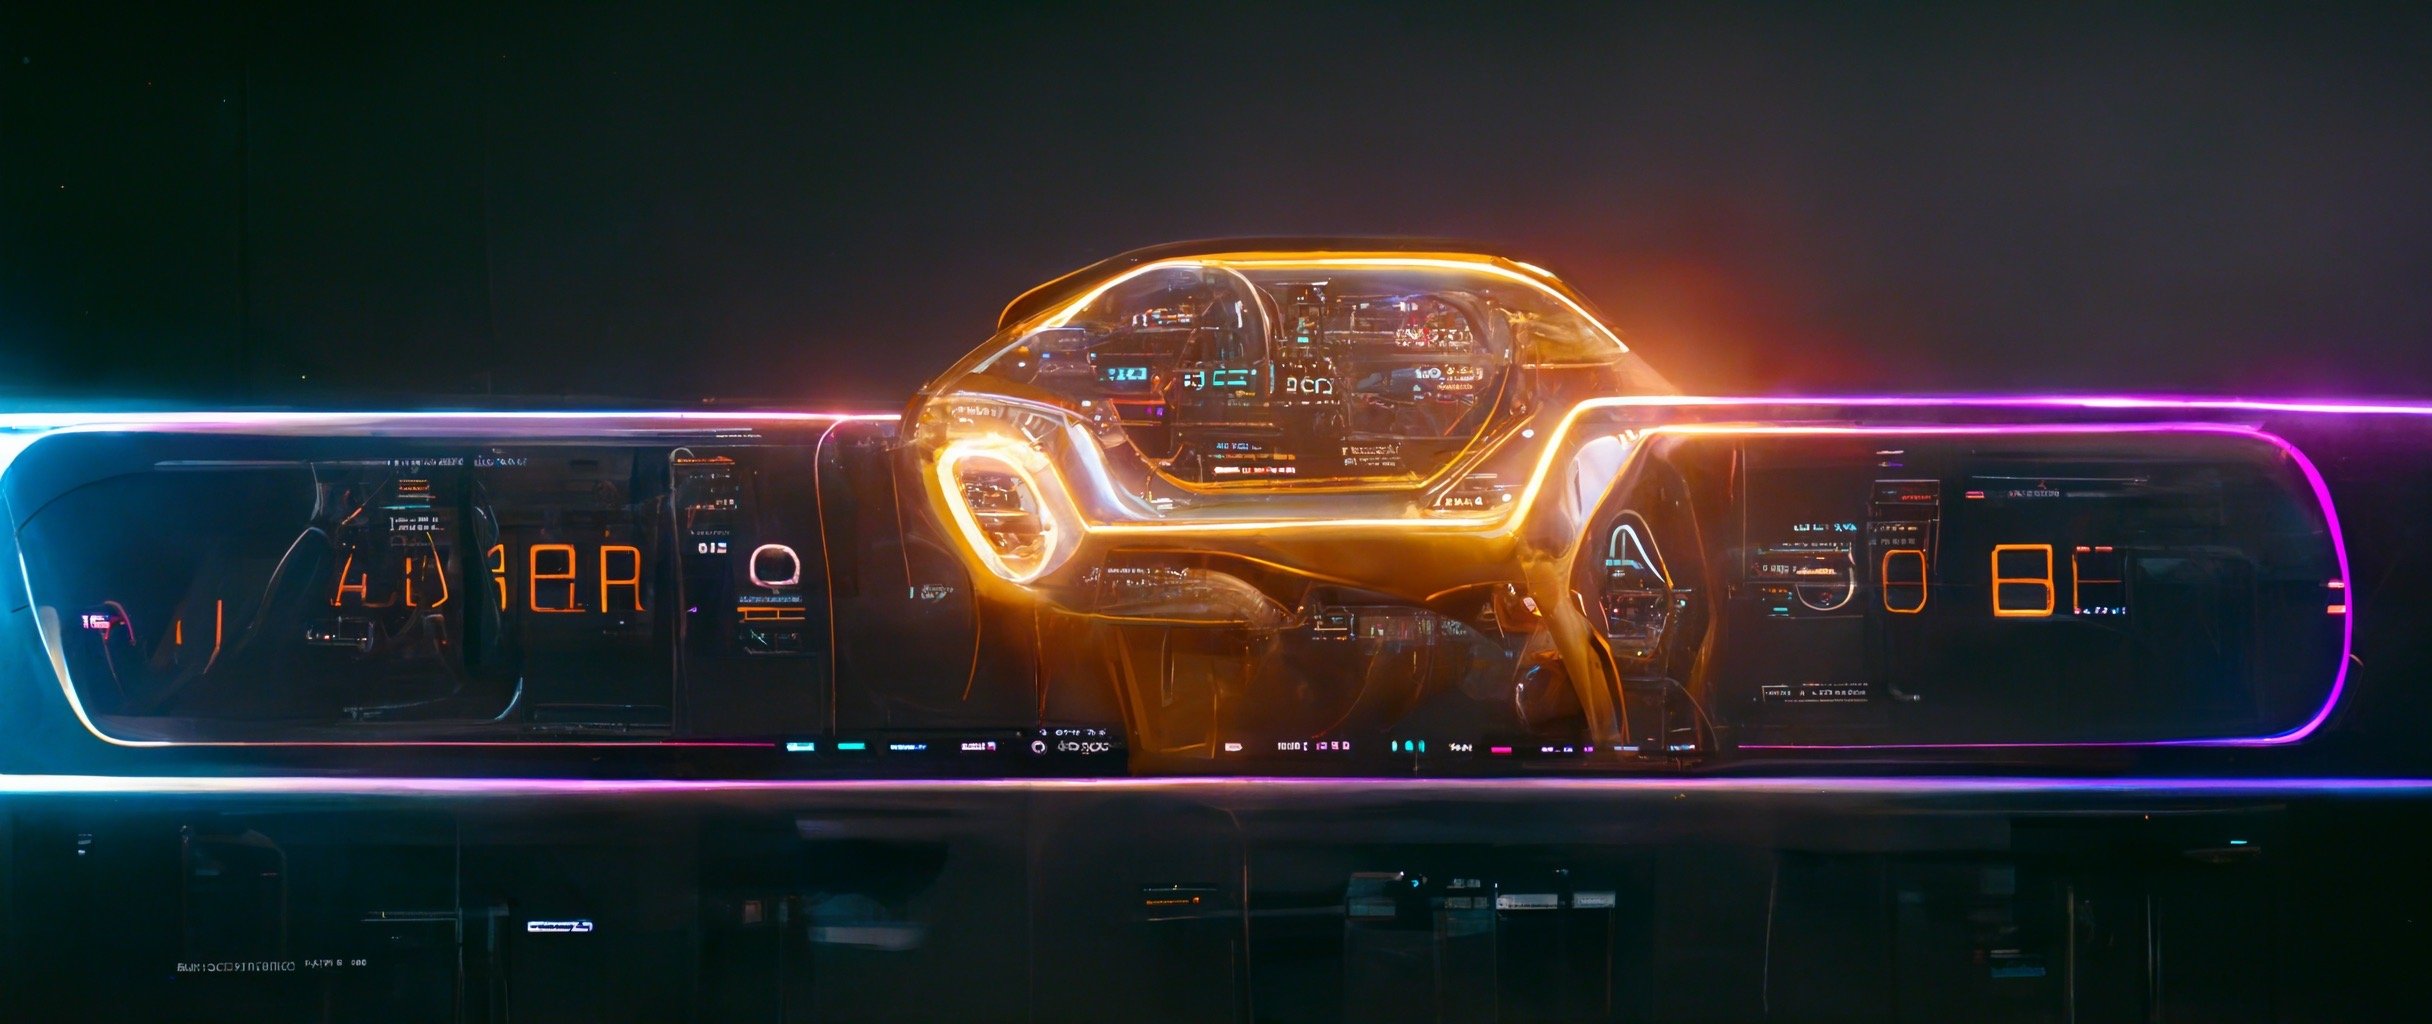 f57dc90f-1ccd-422a-a48b-7aaf125435df_S3RAPH_httpss.mj.runeVTj0B__Amber_glowing_sci-fi_holographic_interface_screen_multiple_tech_colors_curved_v.JPG